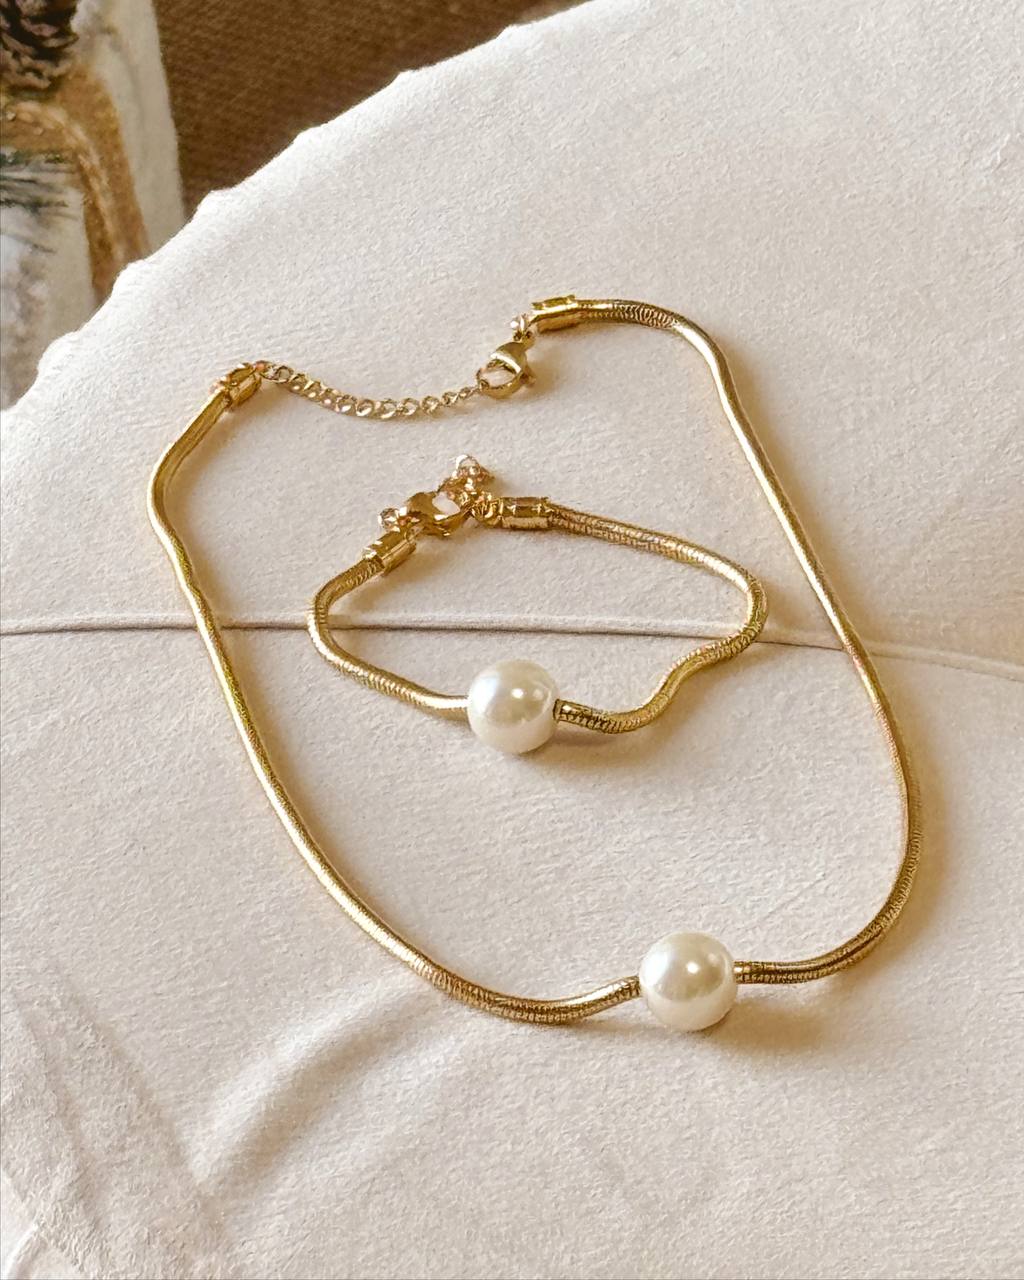 Stainless steel Necklace and bracelet set with pearl details